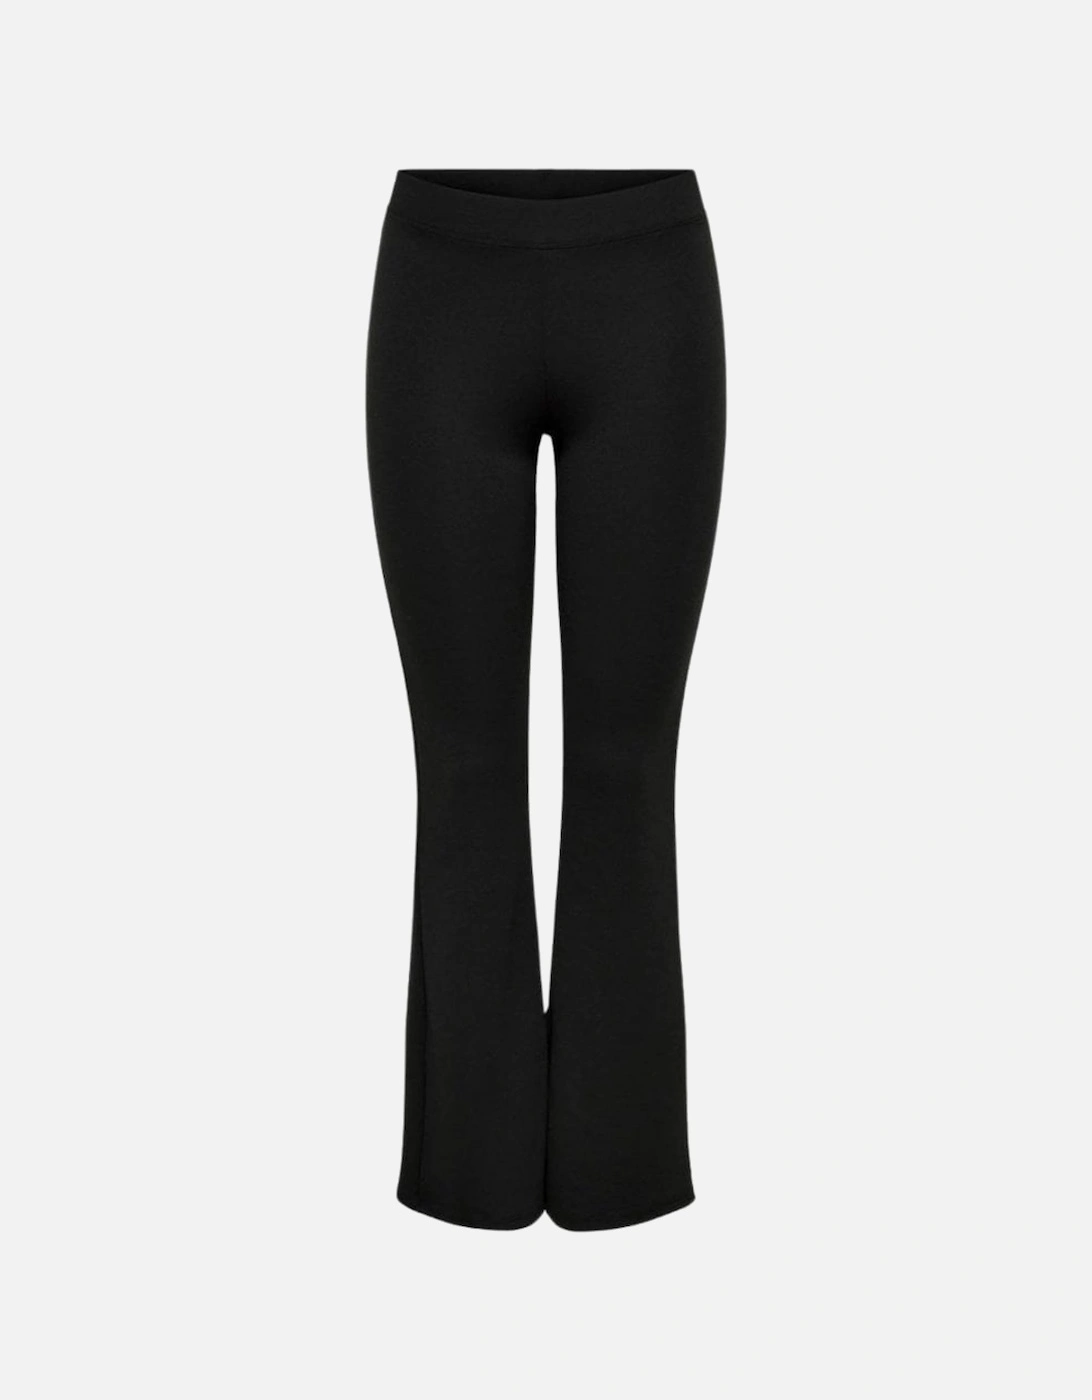 Fever Strech Flaired Trousers - Black, 7 of 6